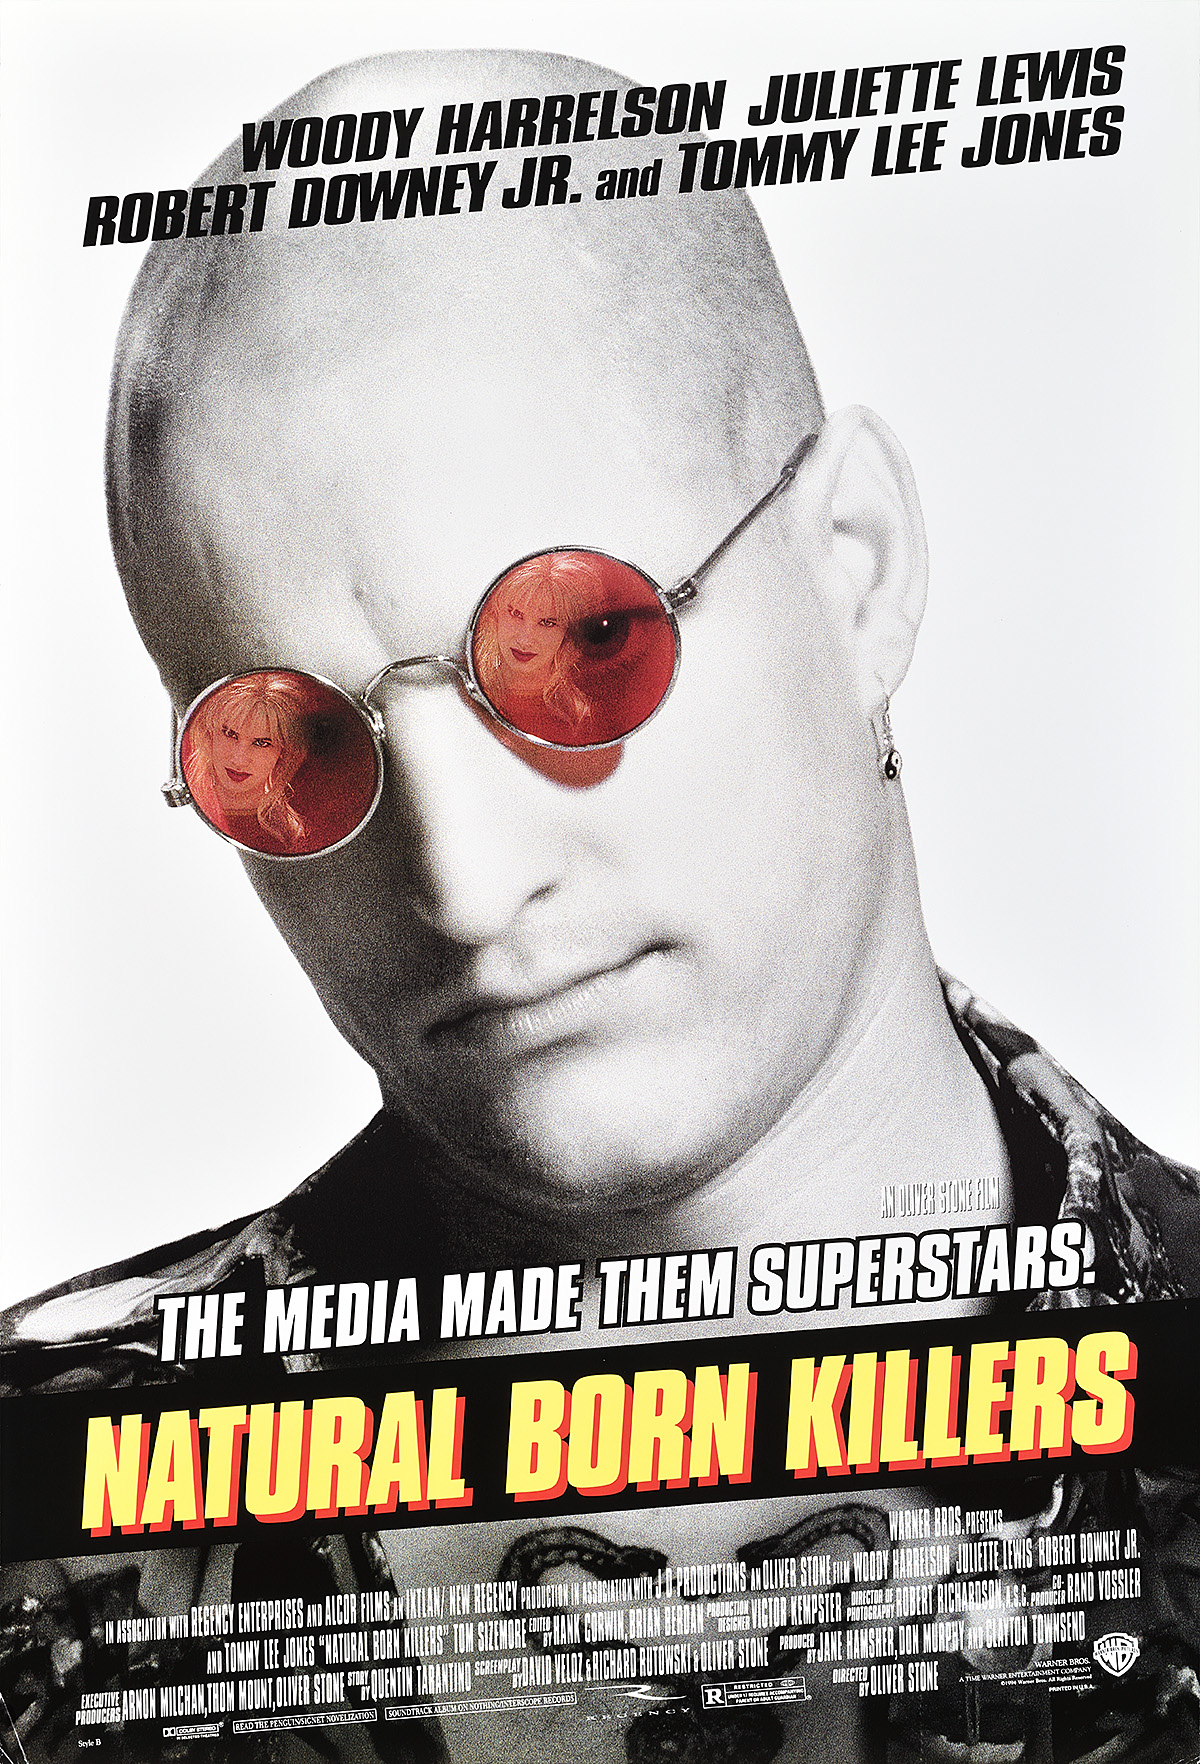 A poster of a bald man wearing red sunglasses, with a blonde woman in the reflection.